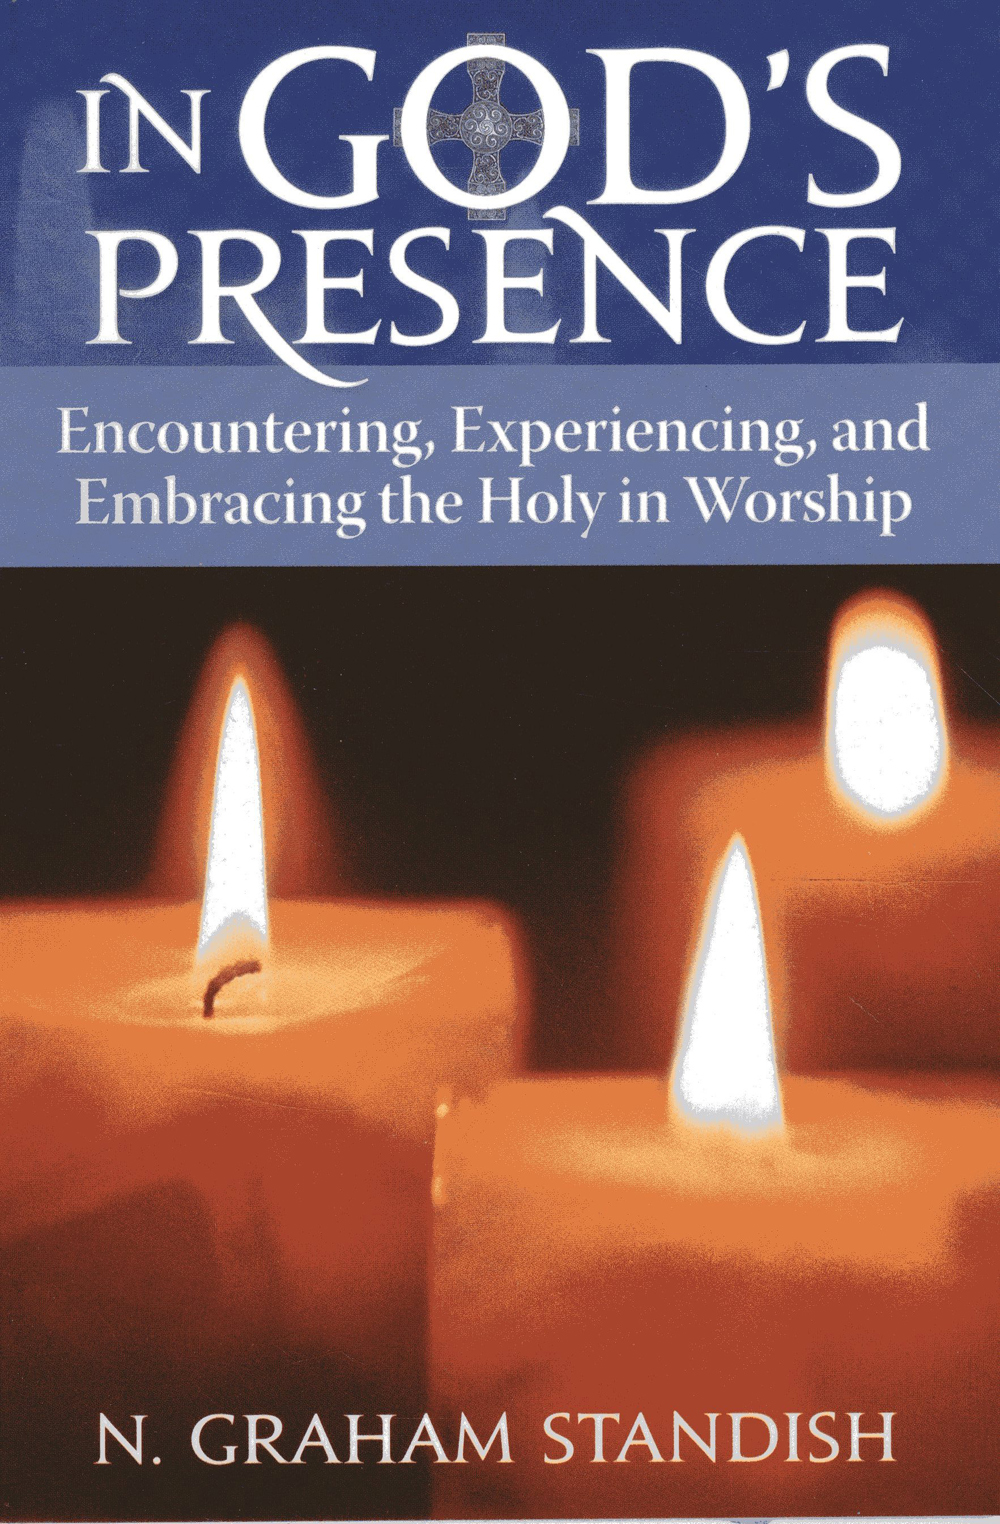 In God's Presence: Encountering, Experiencing, and Embracing the Holy in Worship